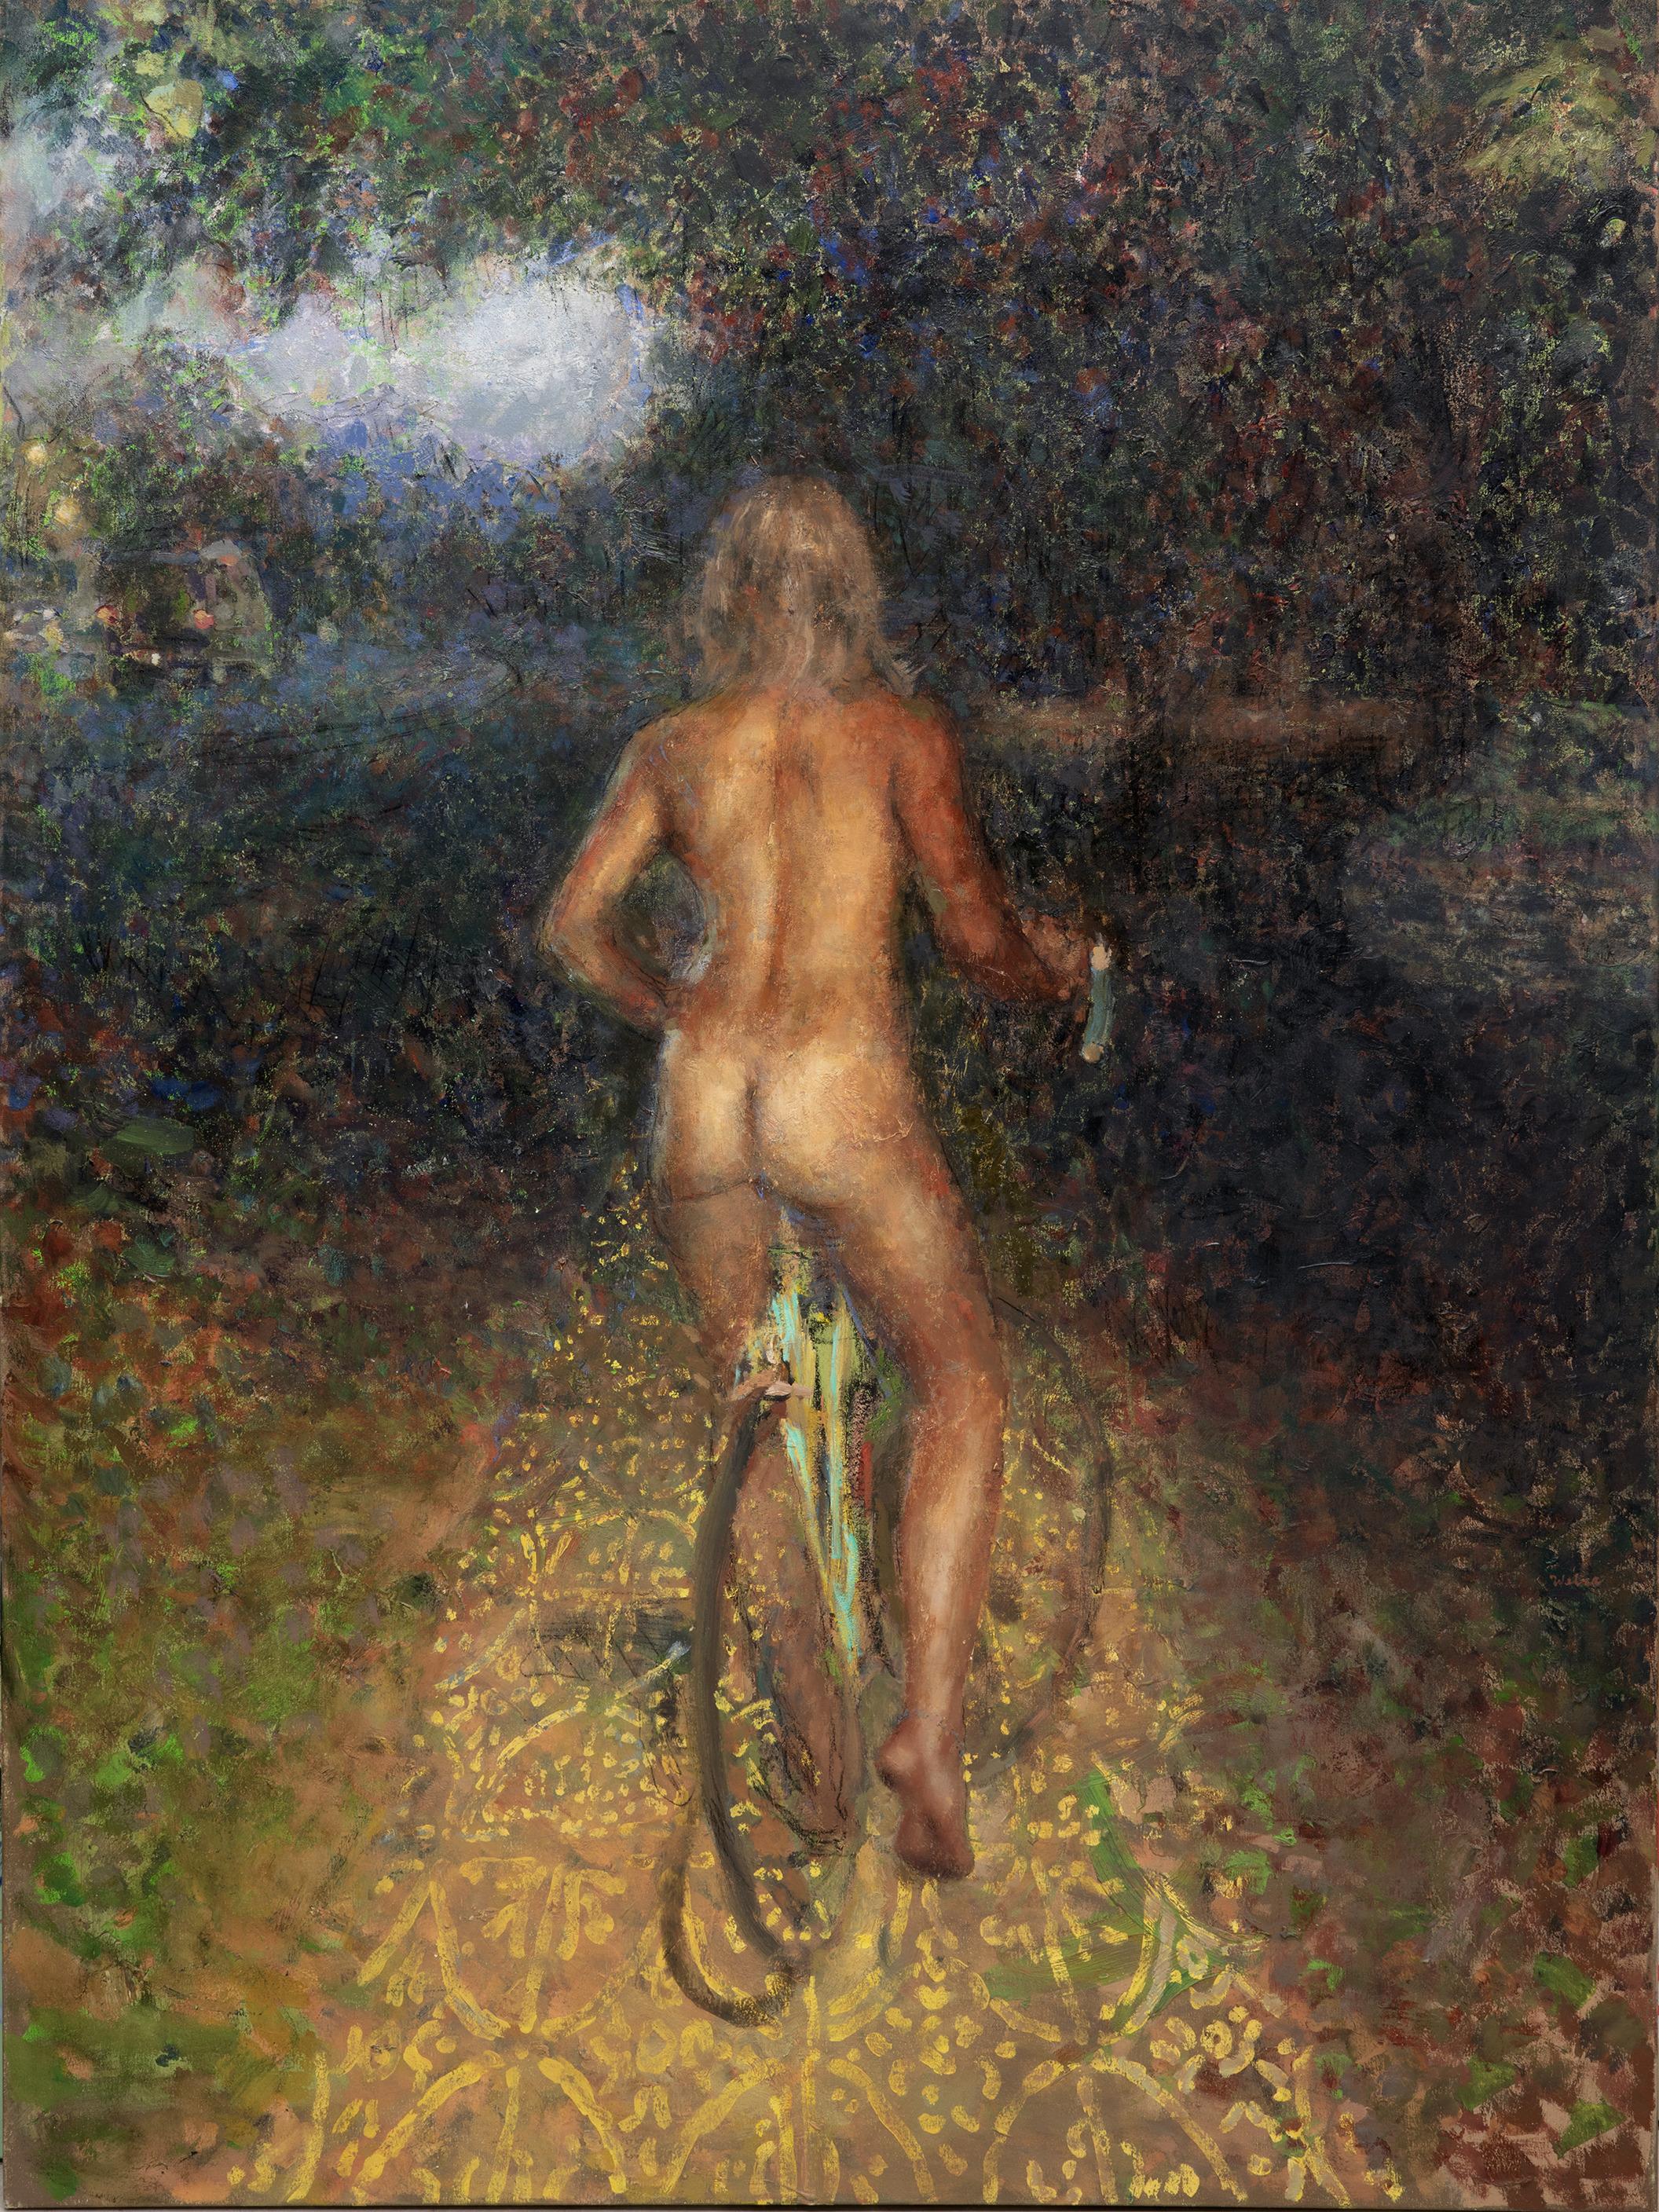 Nick Weber Nude Painting - "Alexandra Leaving" realist & abstract merged in oil painting of woman on bike